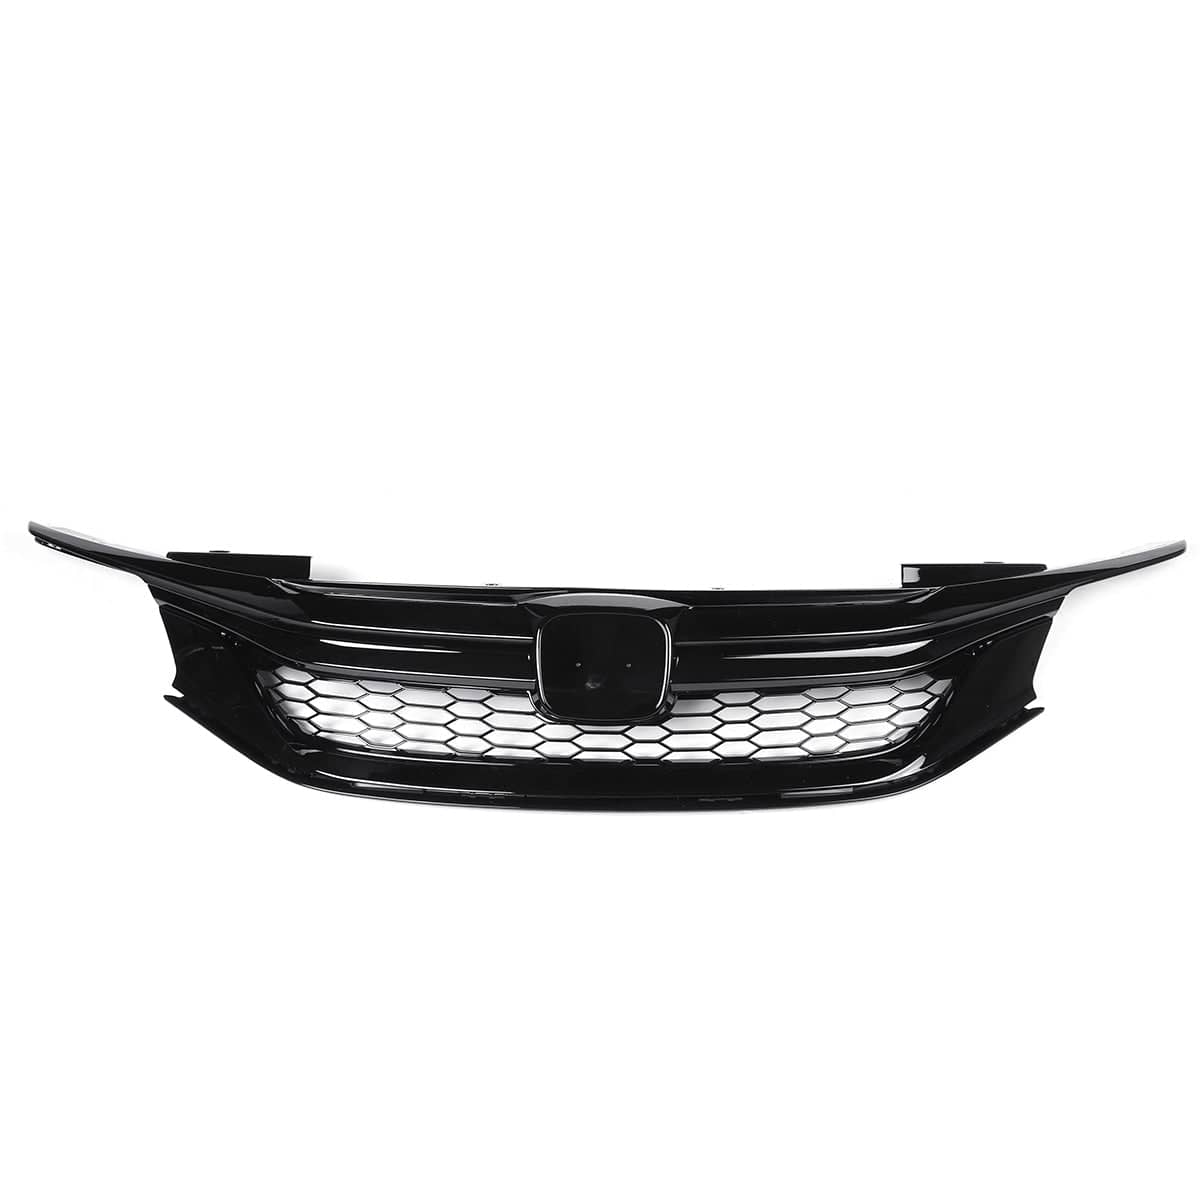 TunerGenix Front Grille Front Grille for Honda Accord 16-17